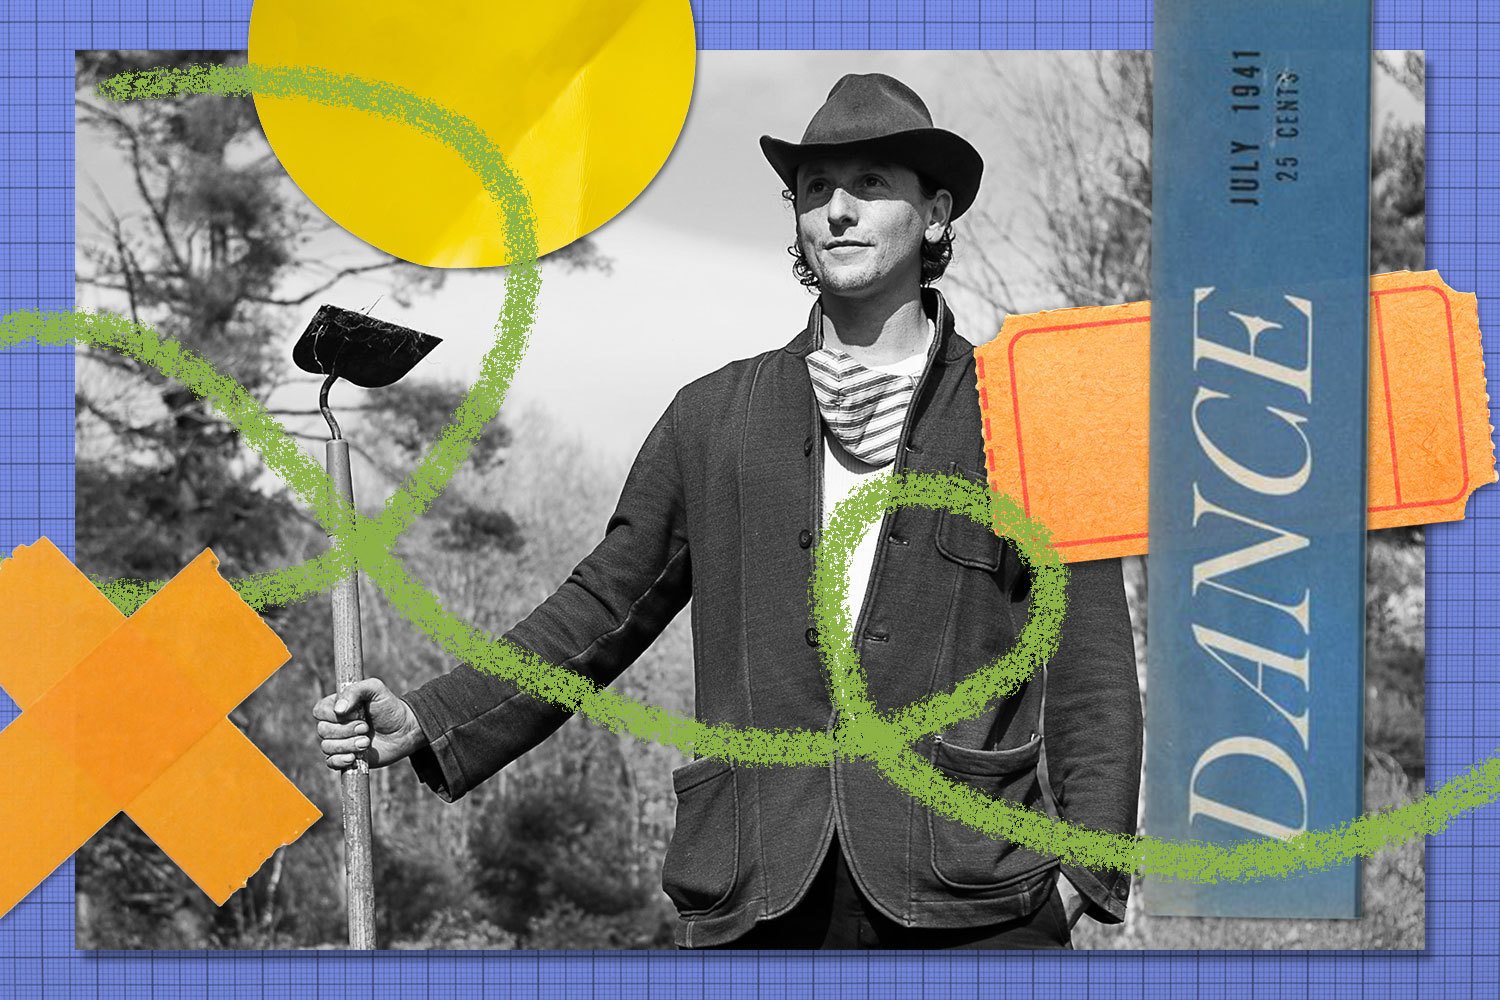 Final Rewrites collage for Adam Weinert with tickets, and old dance show cutout, green doodle, orange tape and yellow label. July 2021